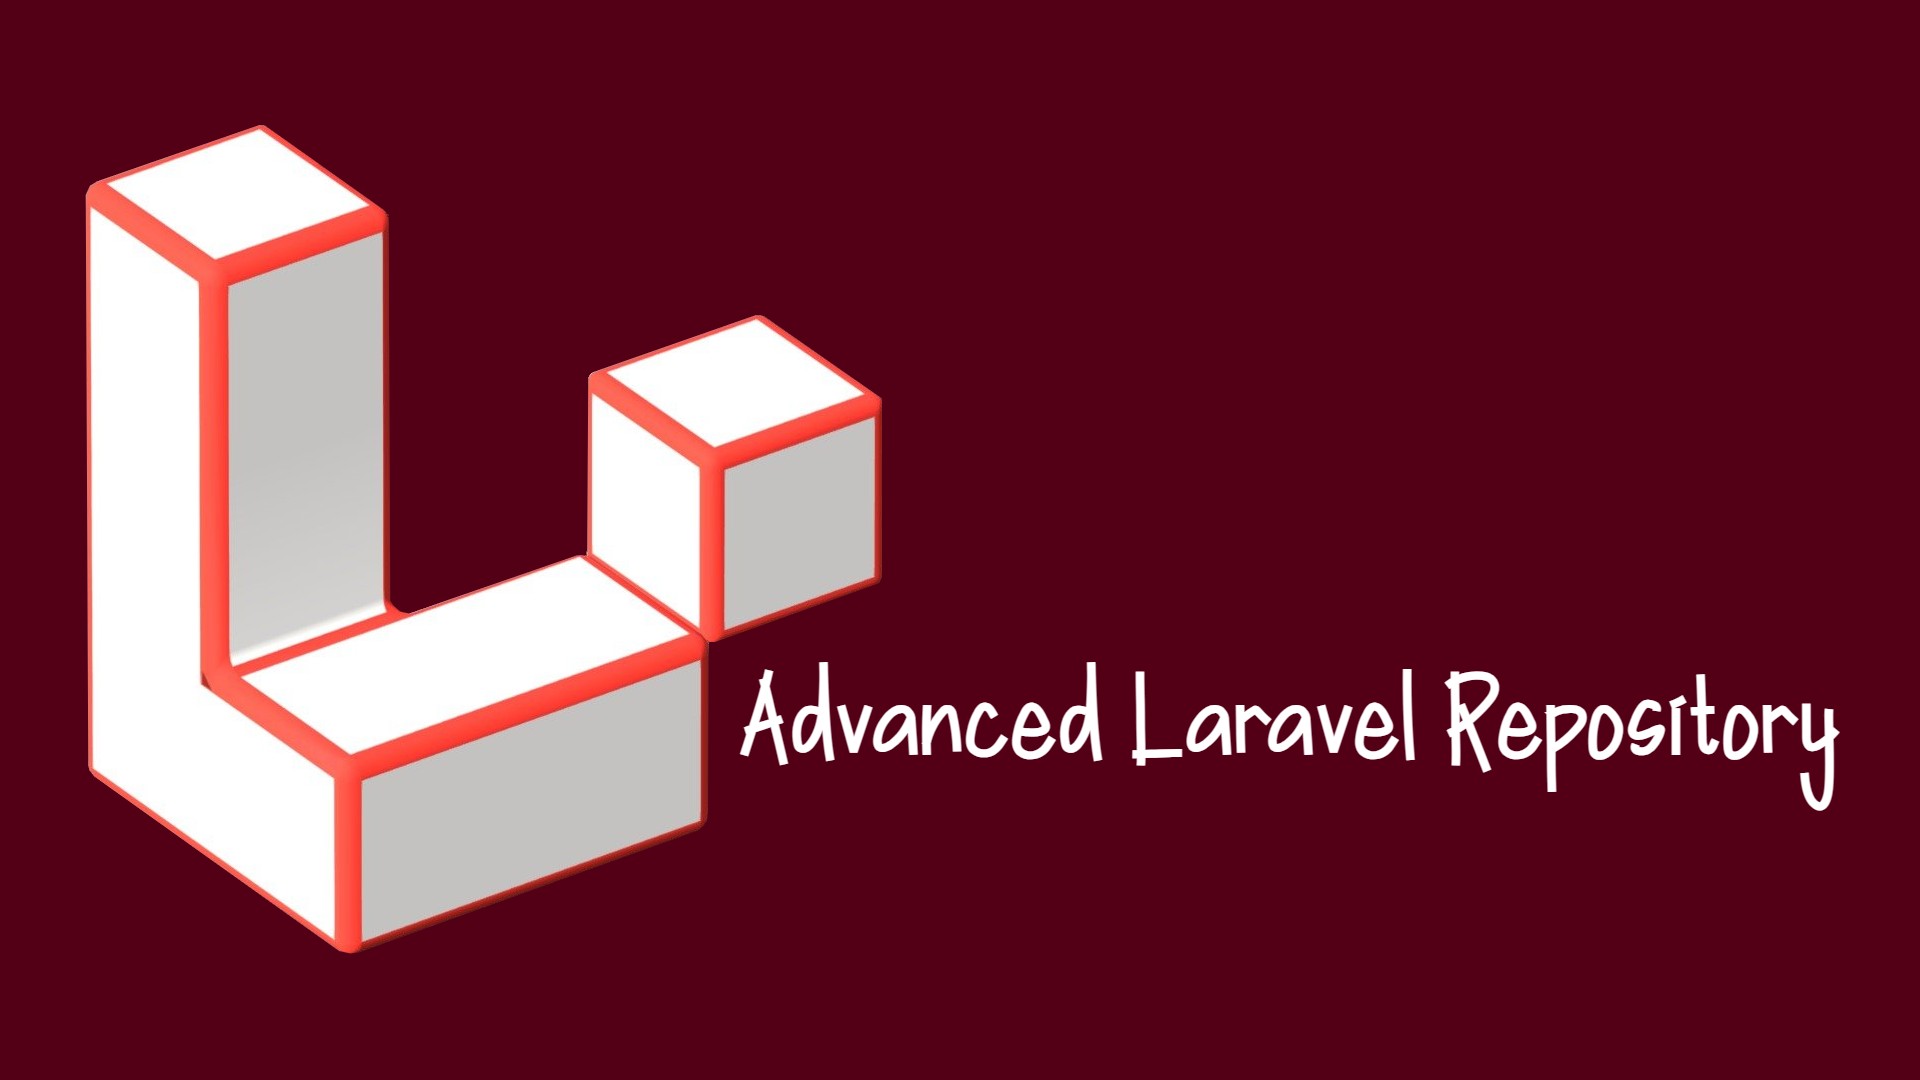 Eloquent ORM (Object Relational Mapping) in Laravel - TechvBlogs